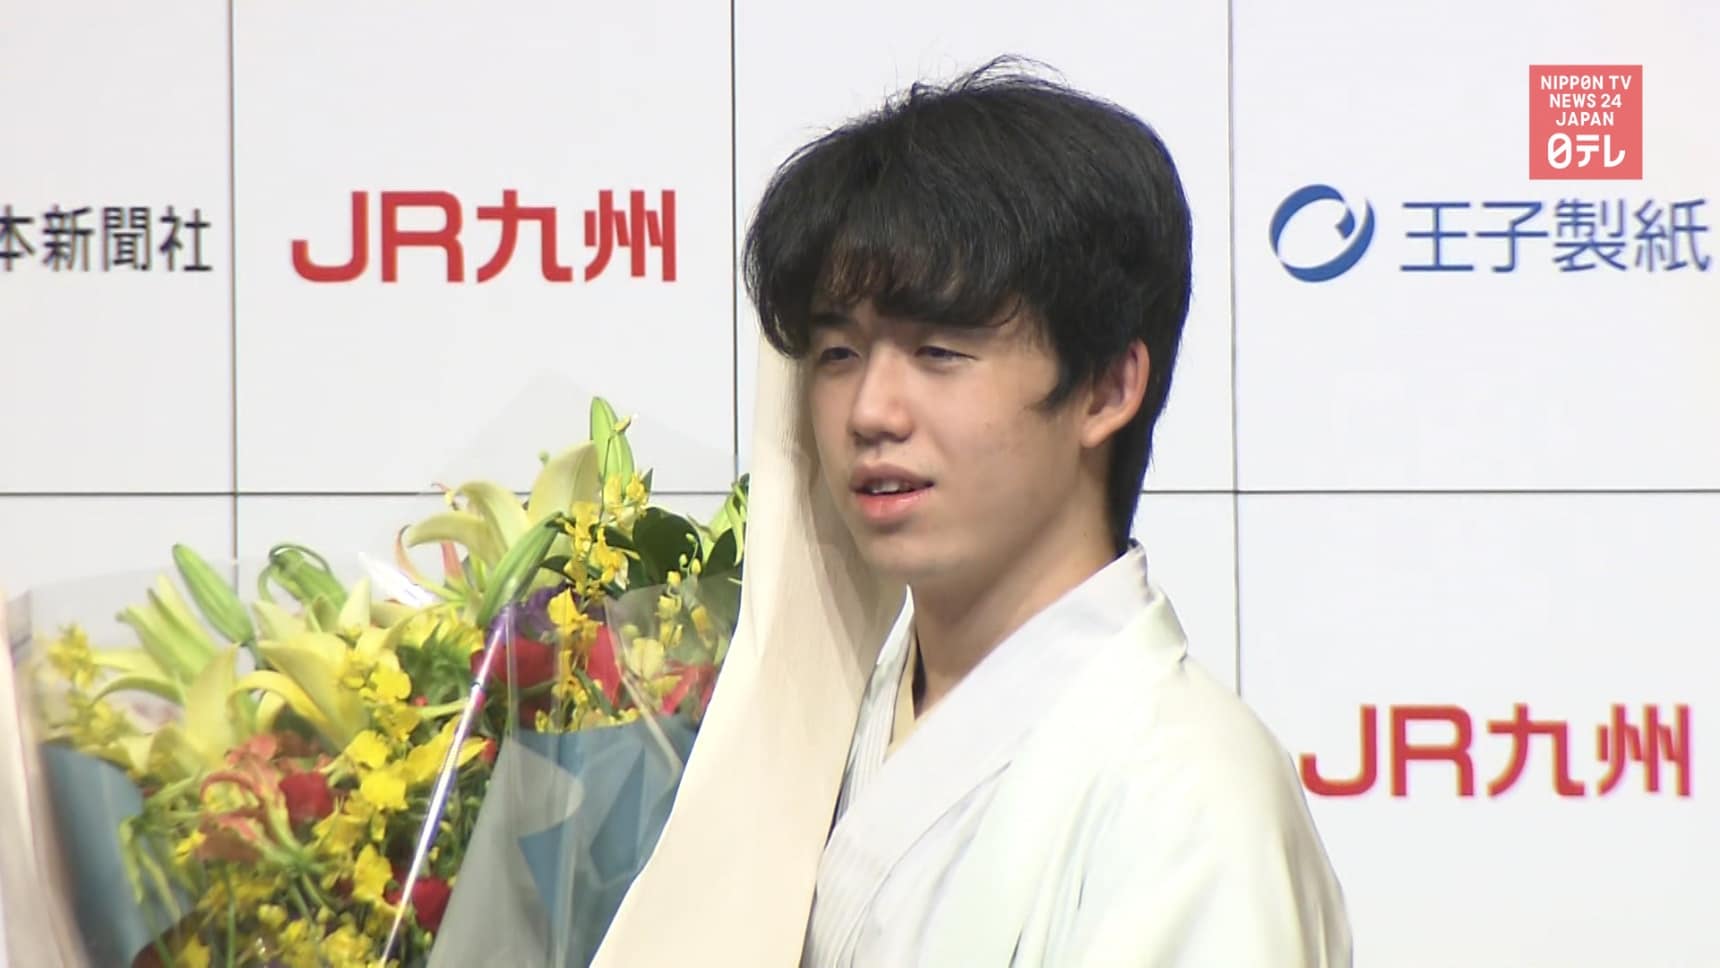 Shogi Prodigy Becomes Youngest with 2 Titles